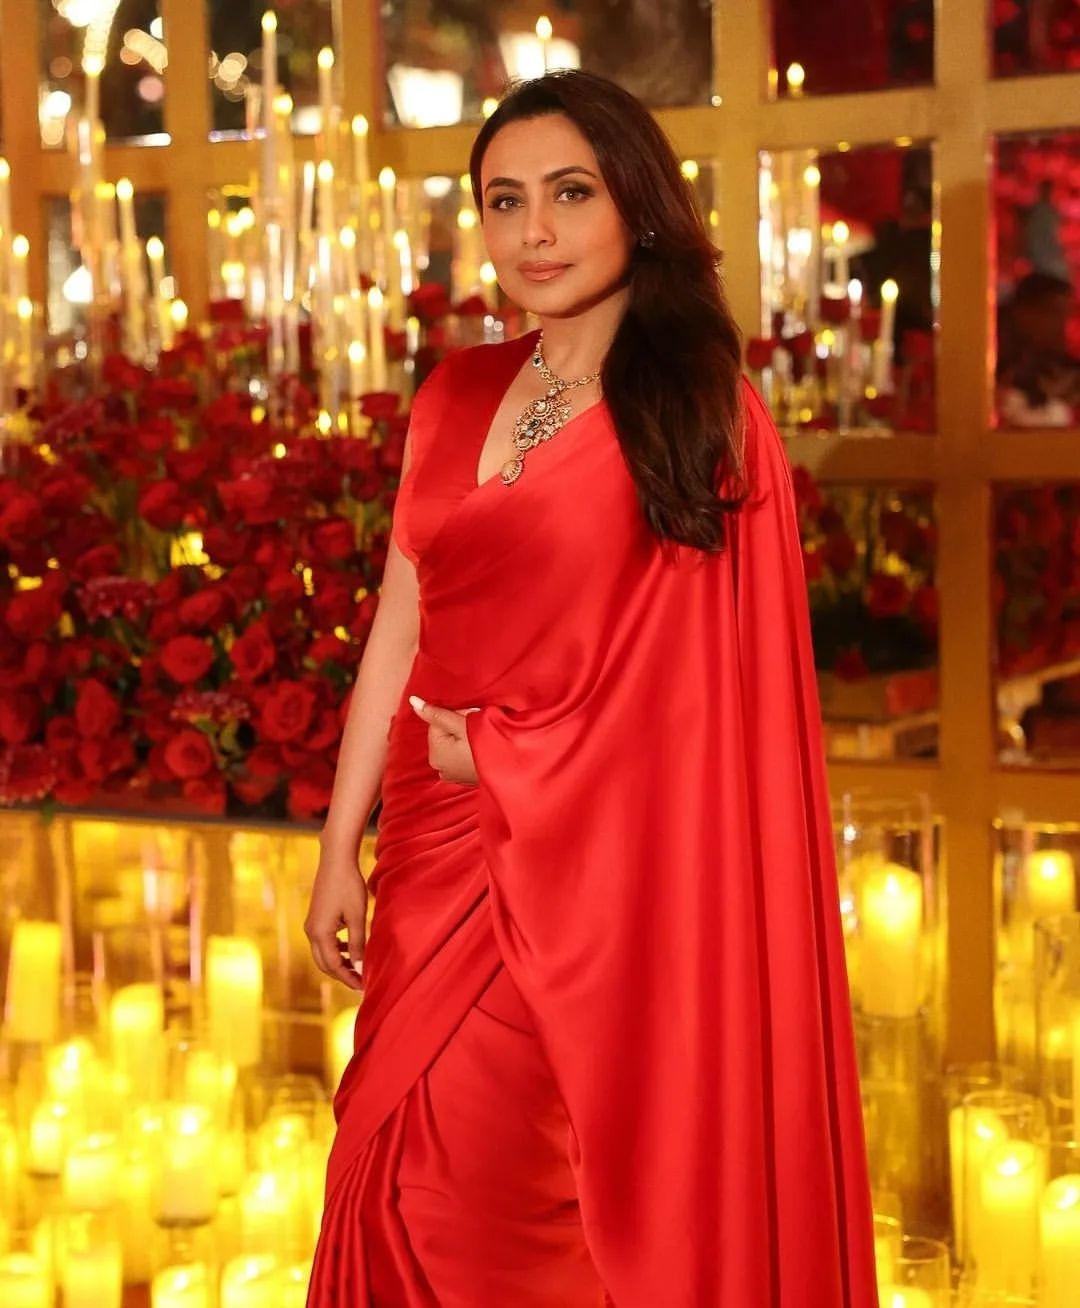 For the Ambani bash, Rani Mukherjee decided to switch things up from her typical black and gold attire and instead chose a striking red silk saree. She paired it with a stunning statement neckpiece and left her hair flowing freely